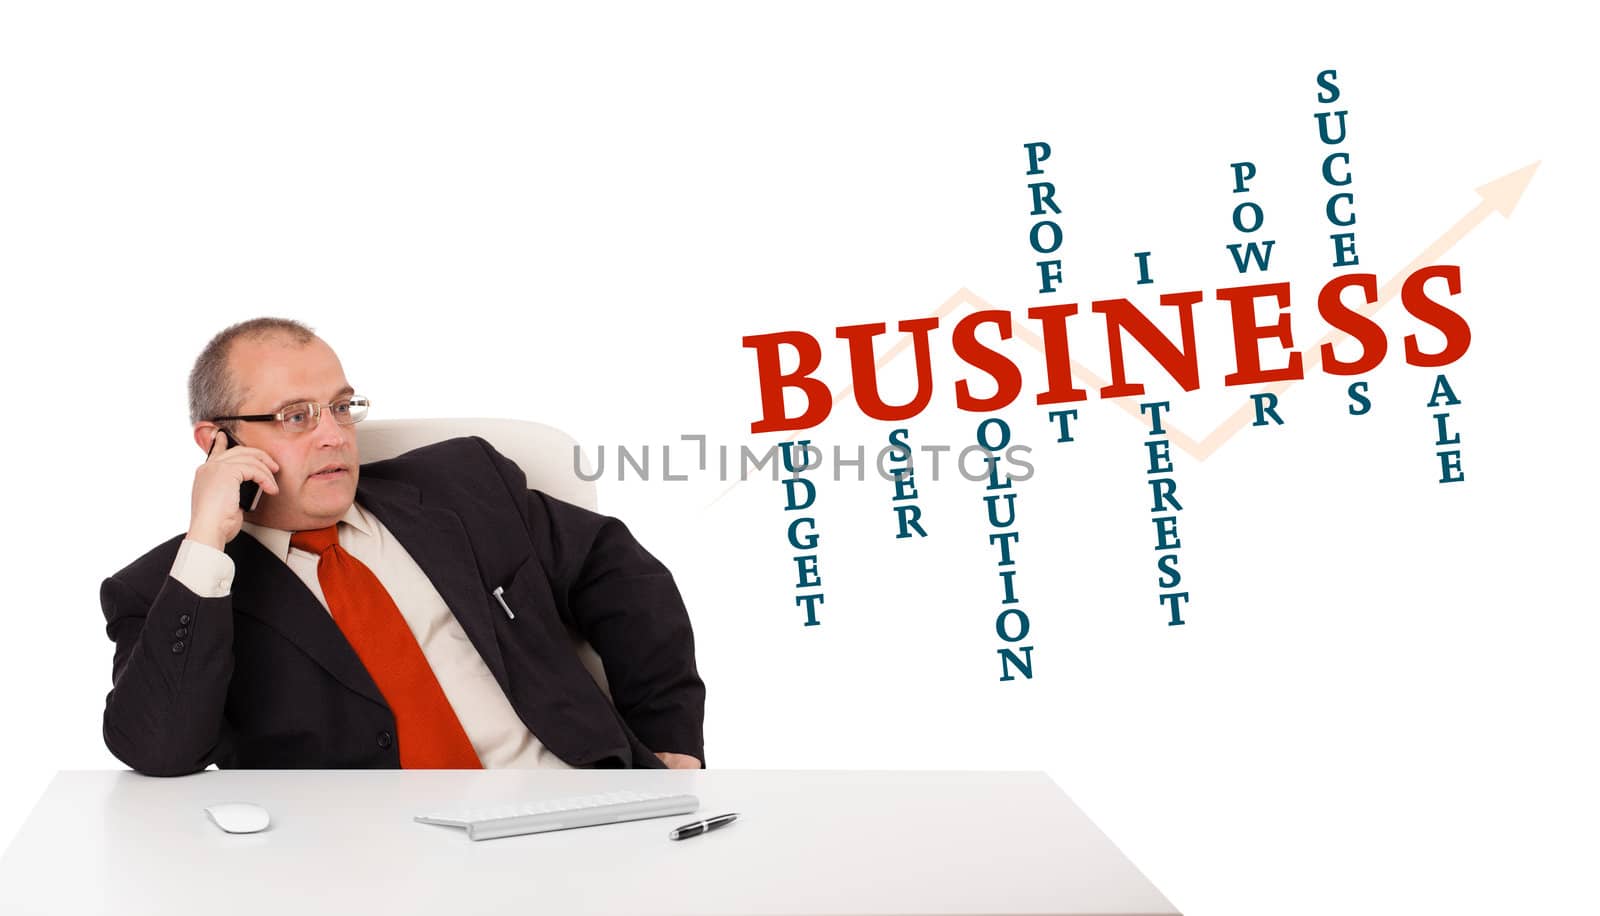 businessman sitting at desk and making phone call with word cloud, isolated on white